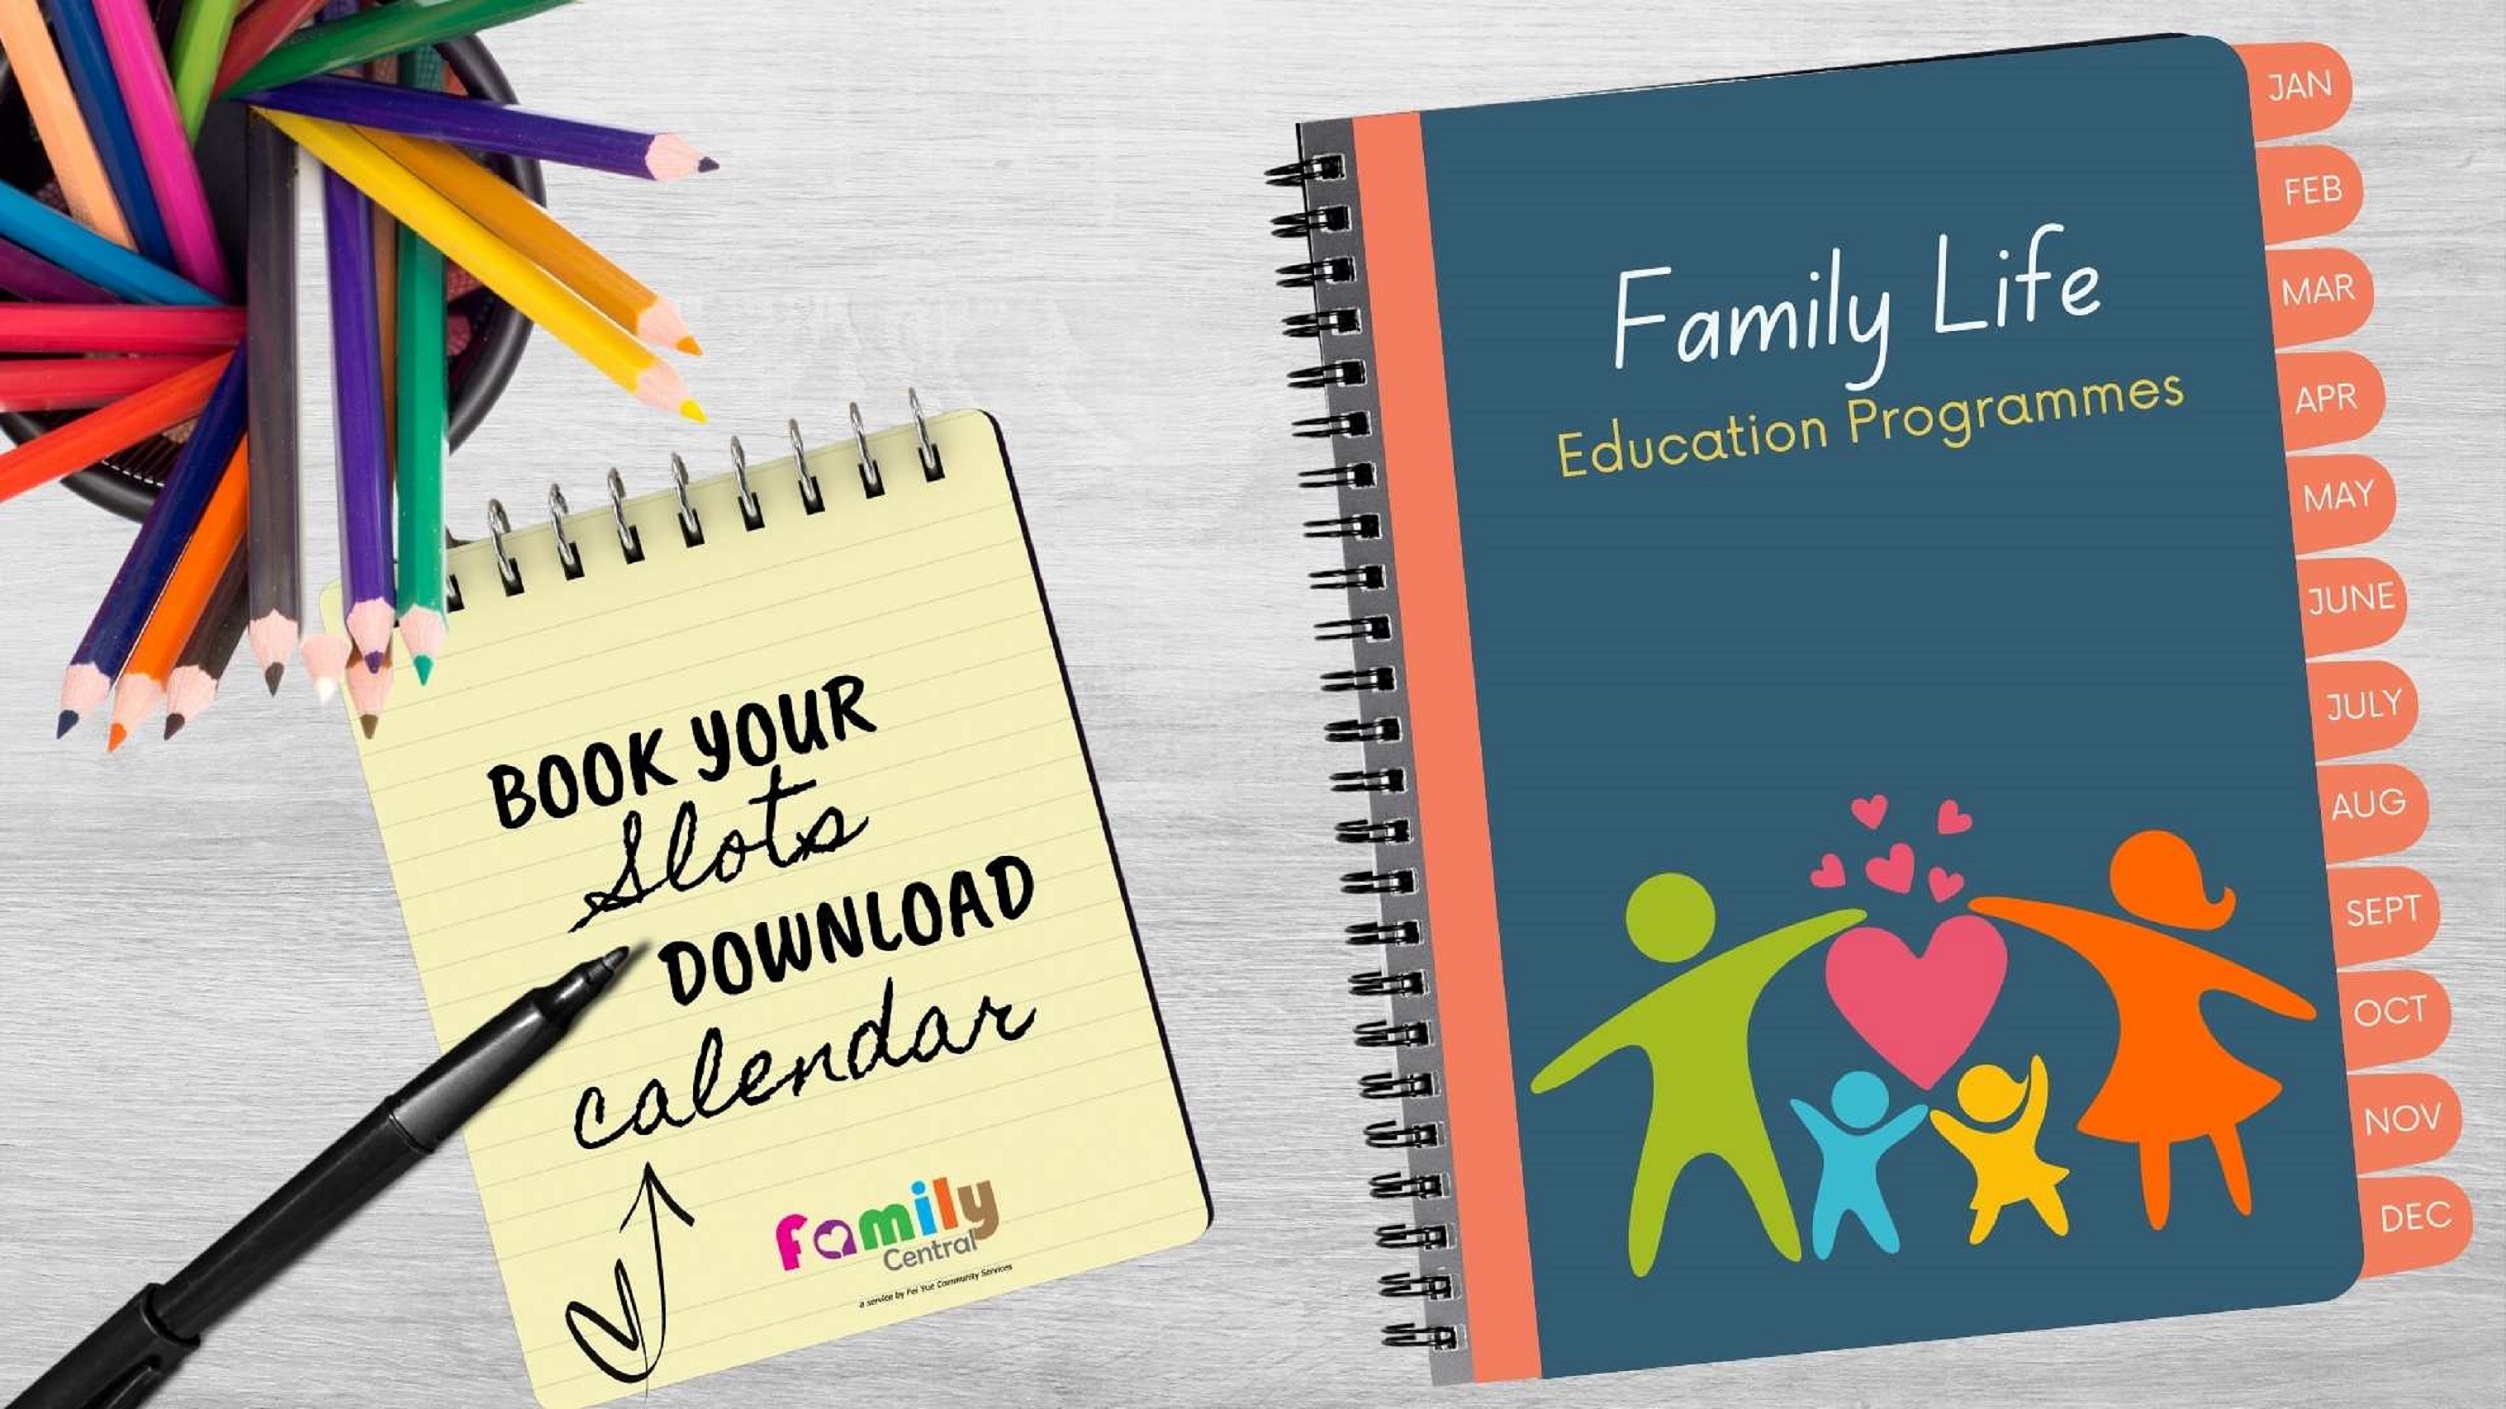 Events image of Family Life Education Programmes Oct-Dec 2022